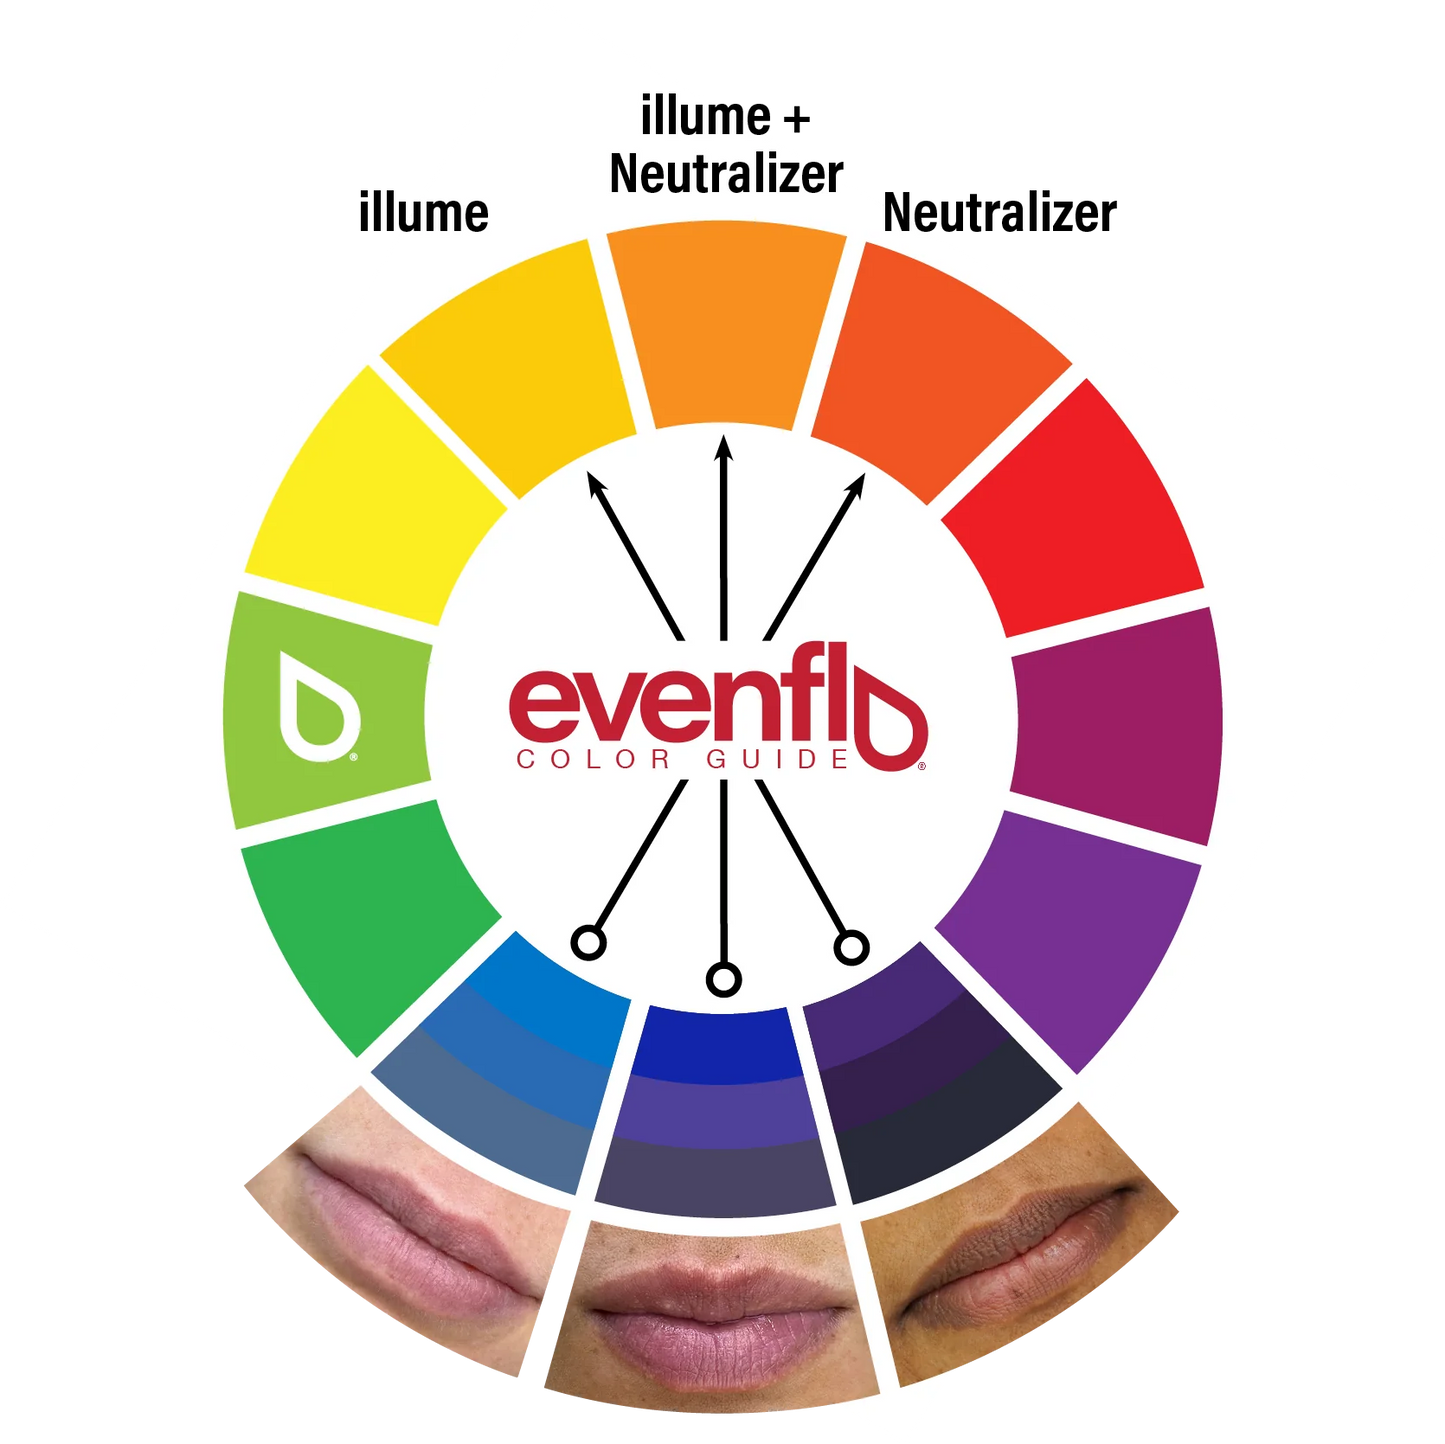 Evenflo Colours by Perma Blend - ILLUME